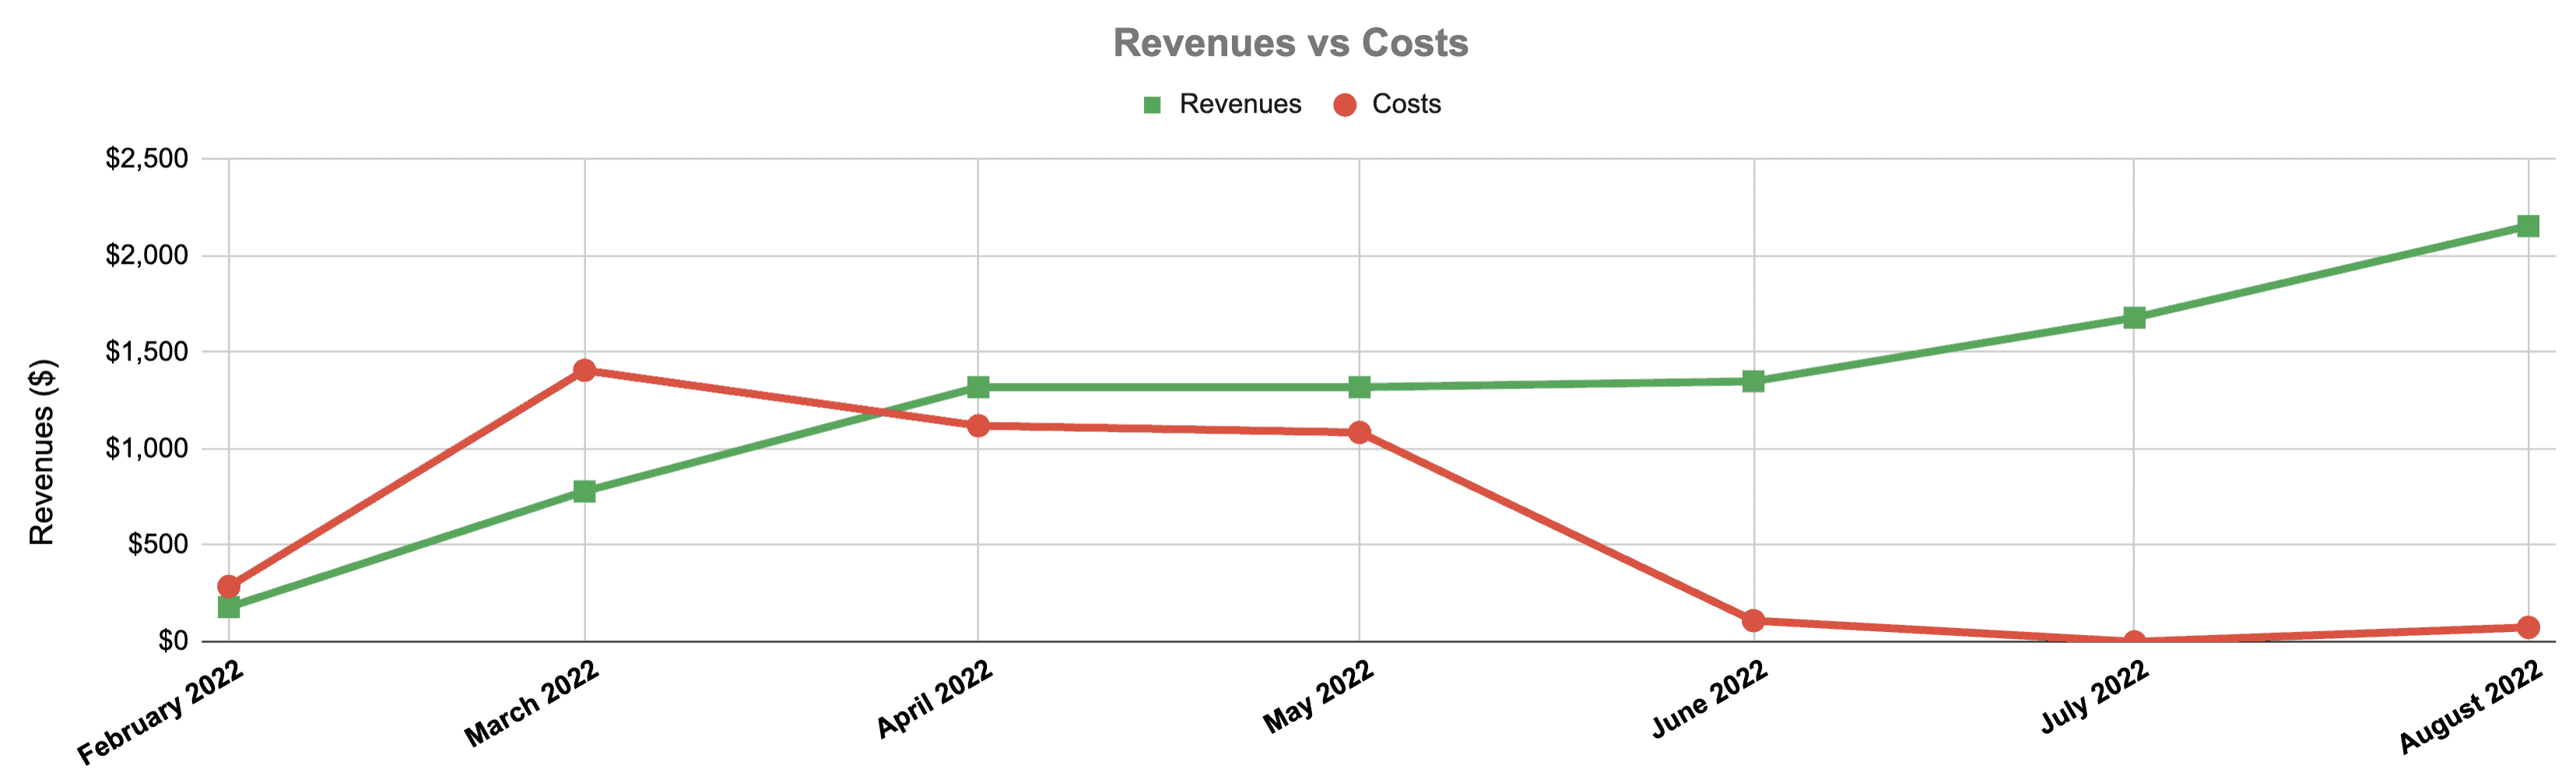 B2B aged domain site revenues and costs